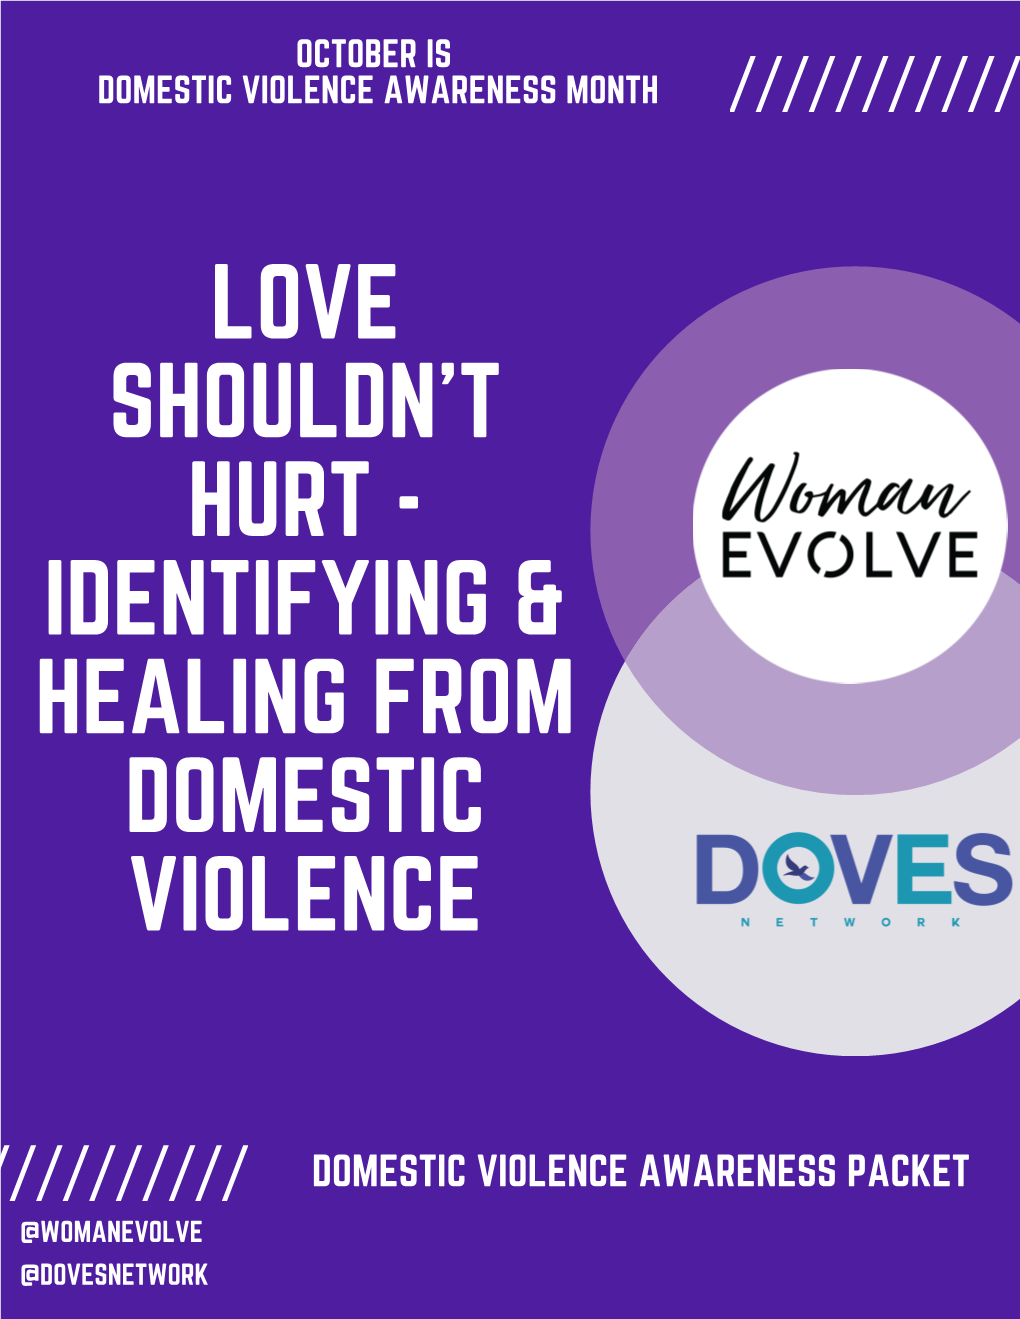 Identifying & Healing from Domestic Violence